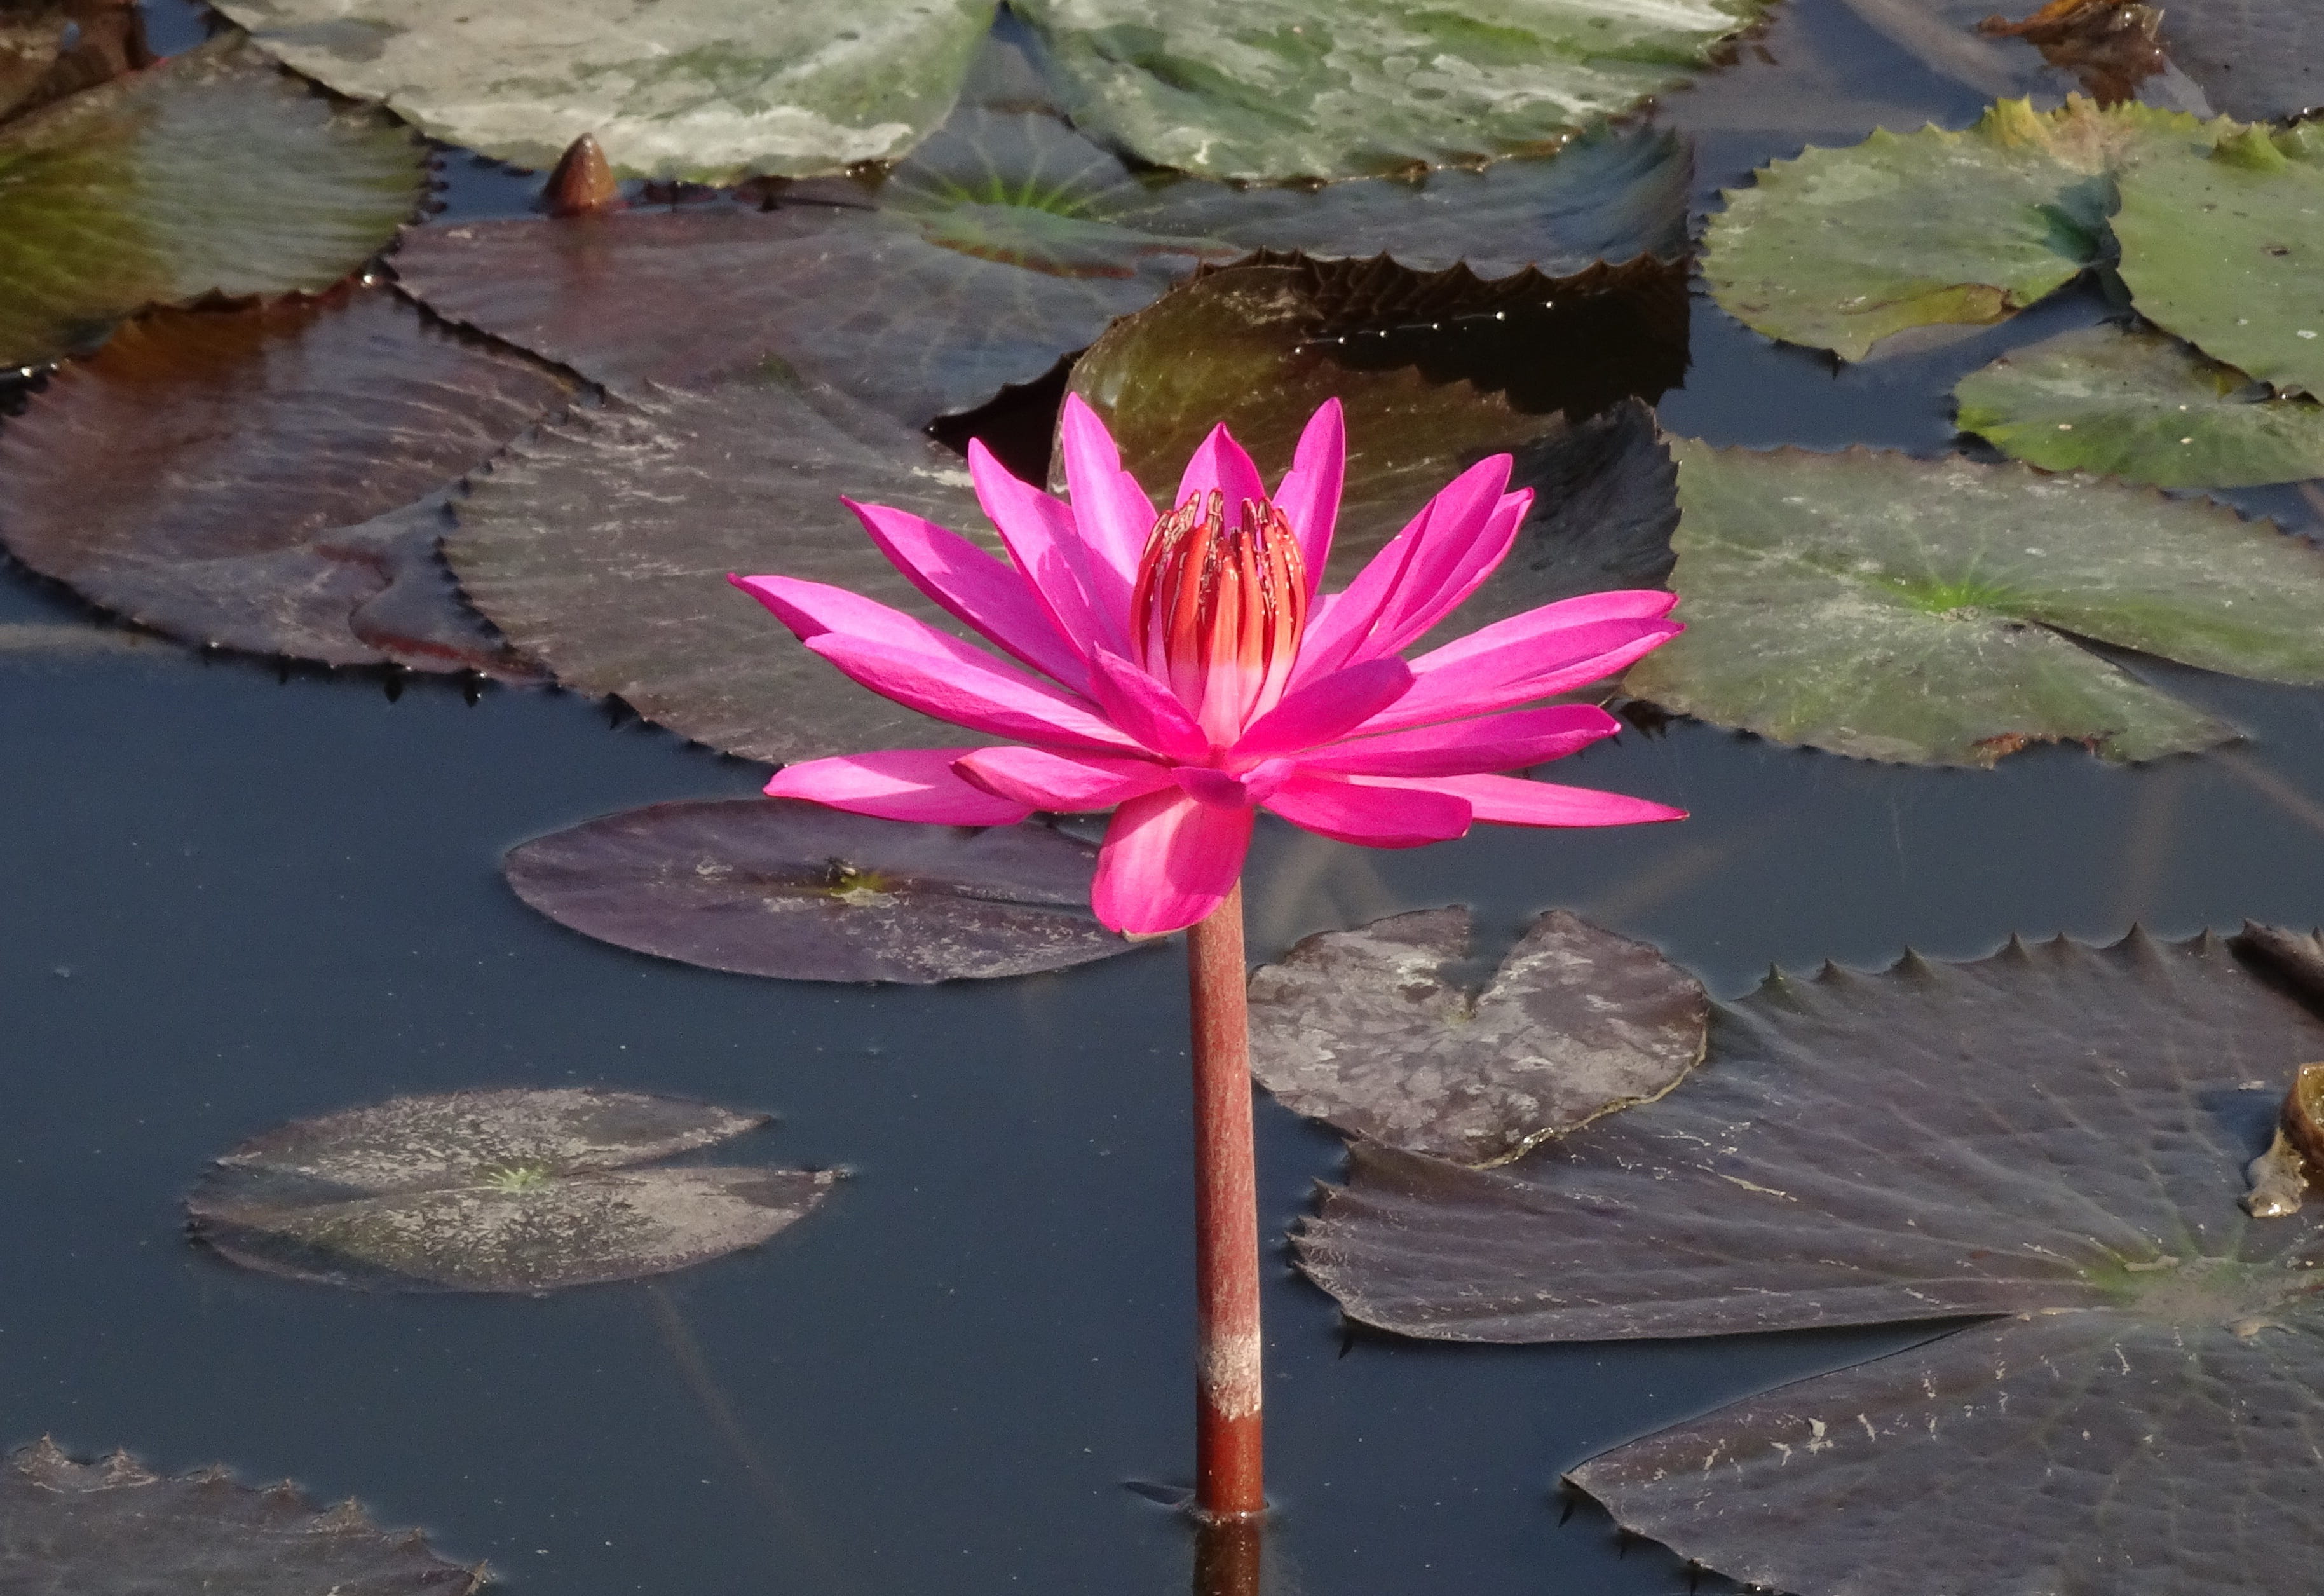 lily, flower, red water lily, pond, nature, aquatic, lal kamal